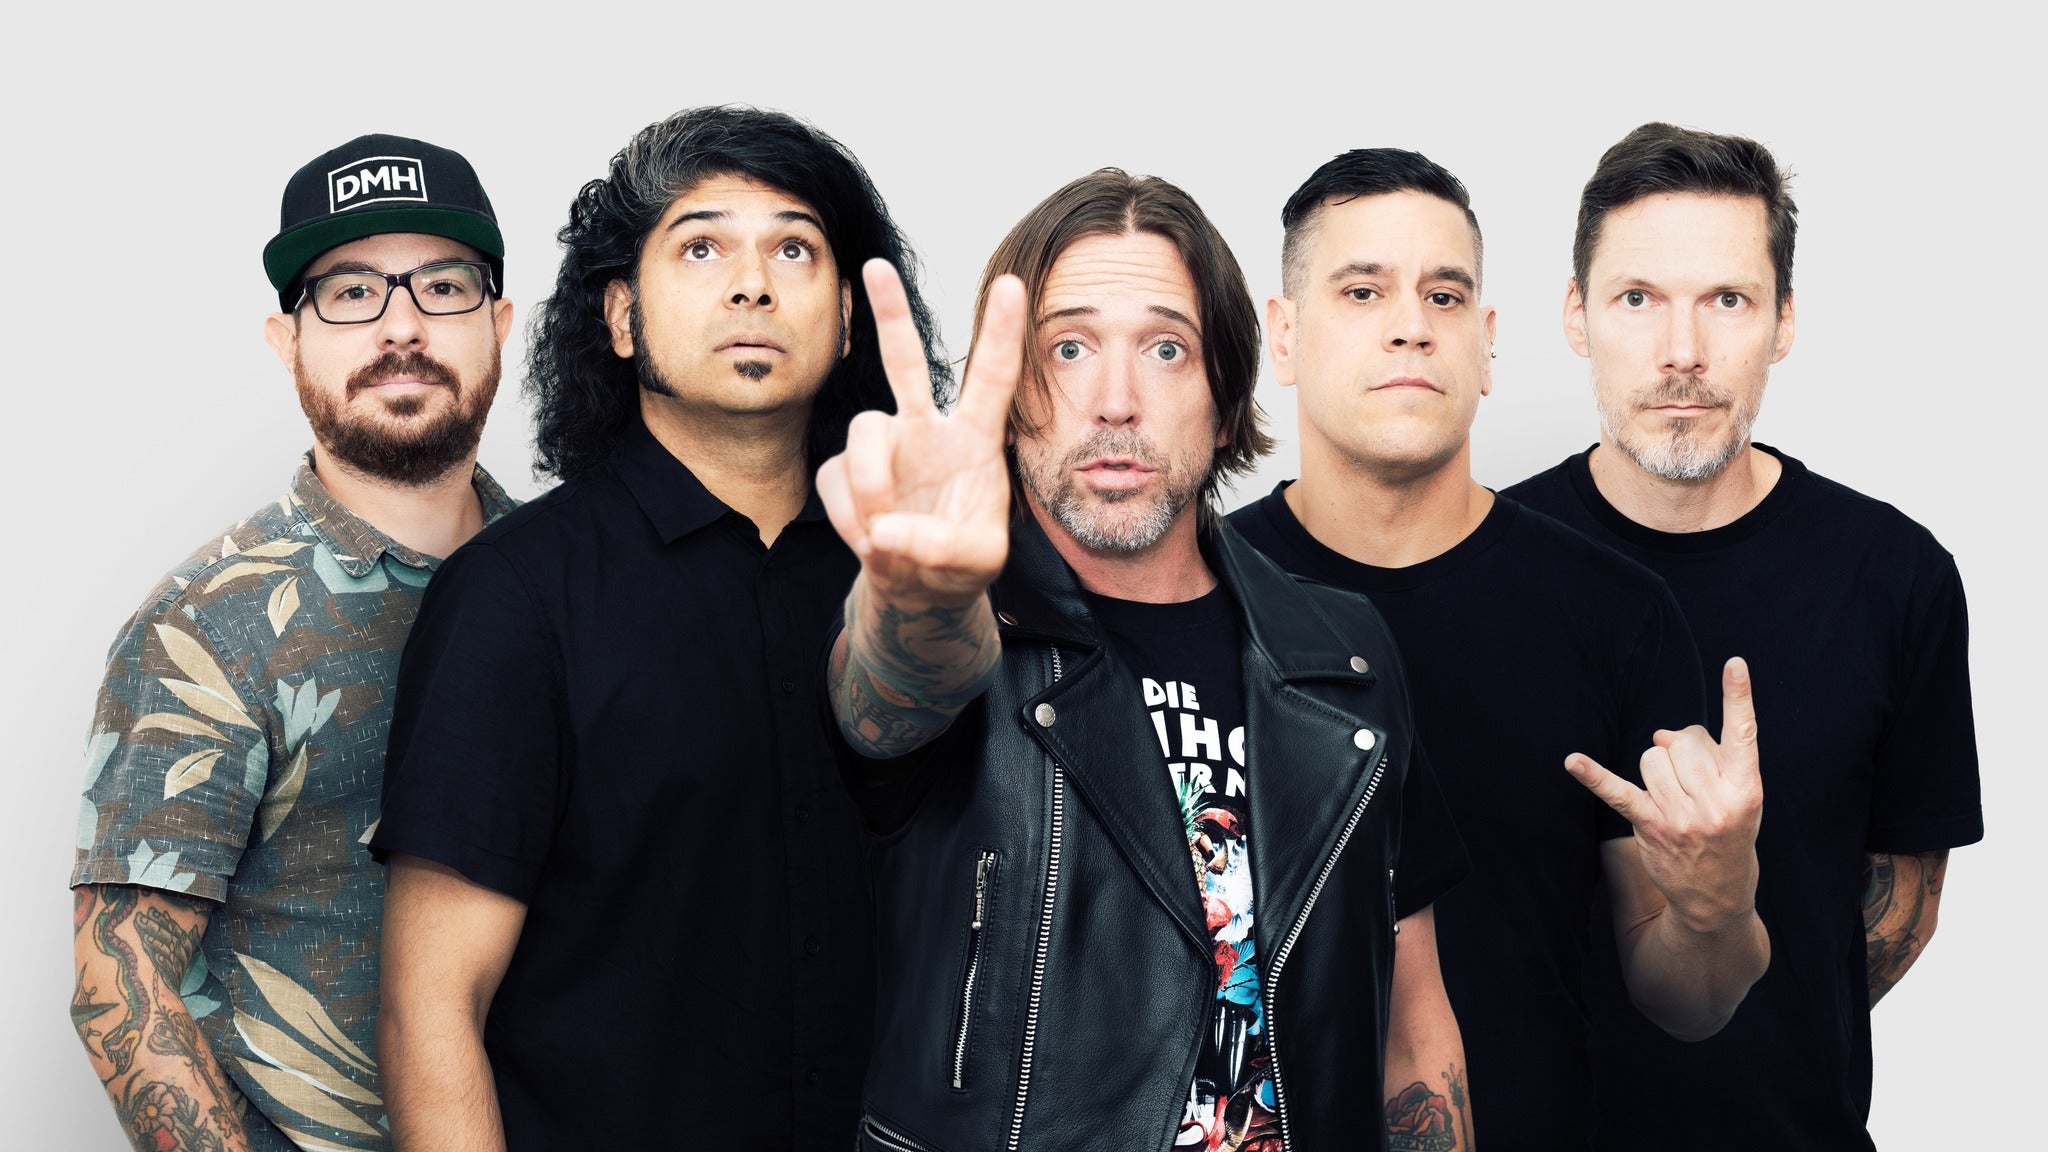 Image used with permission from Ticketmaster | Billy Talent tickets